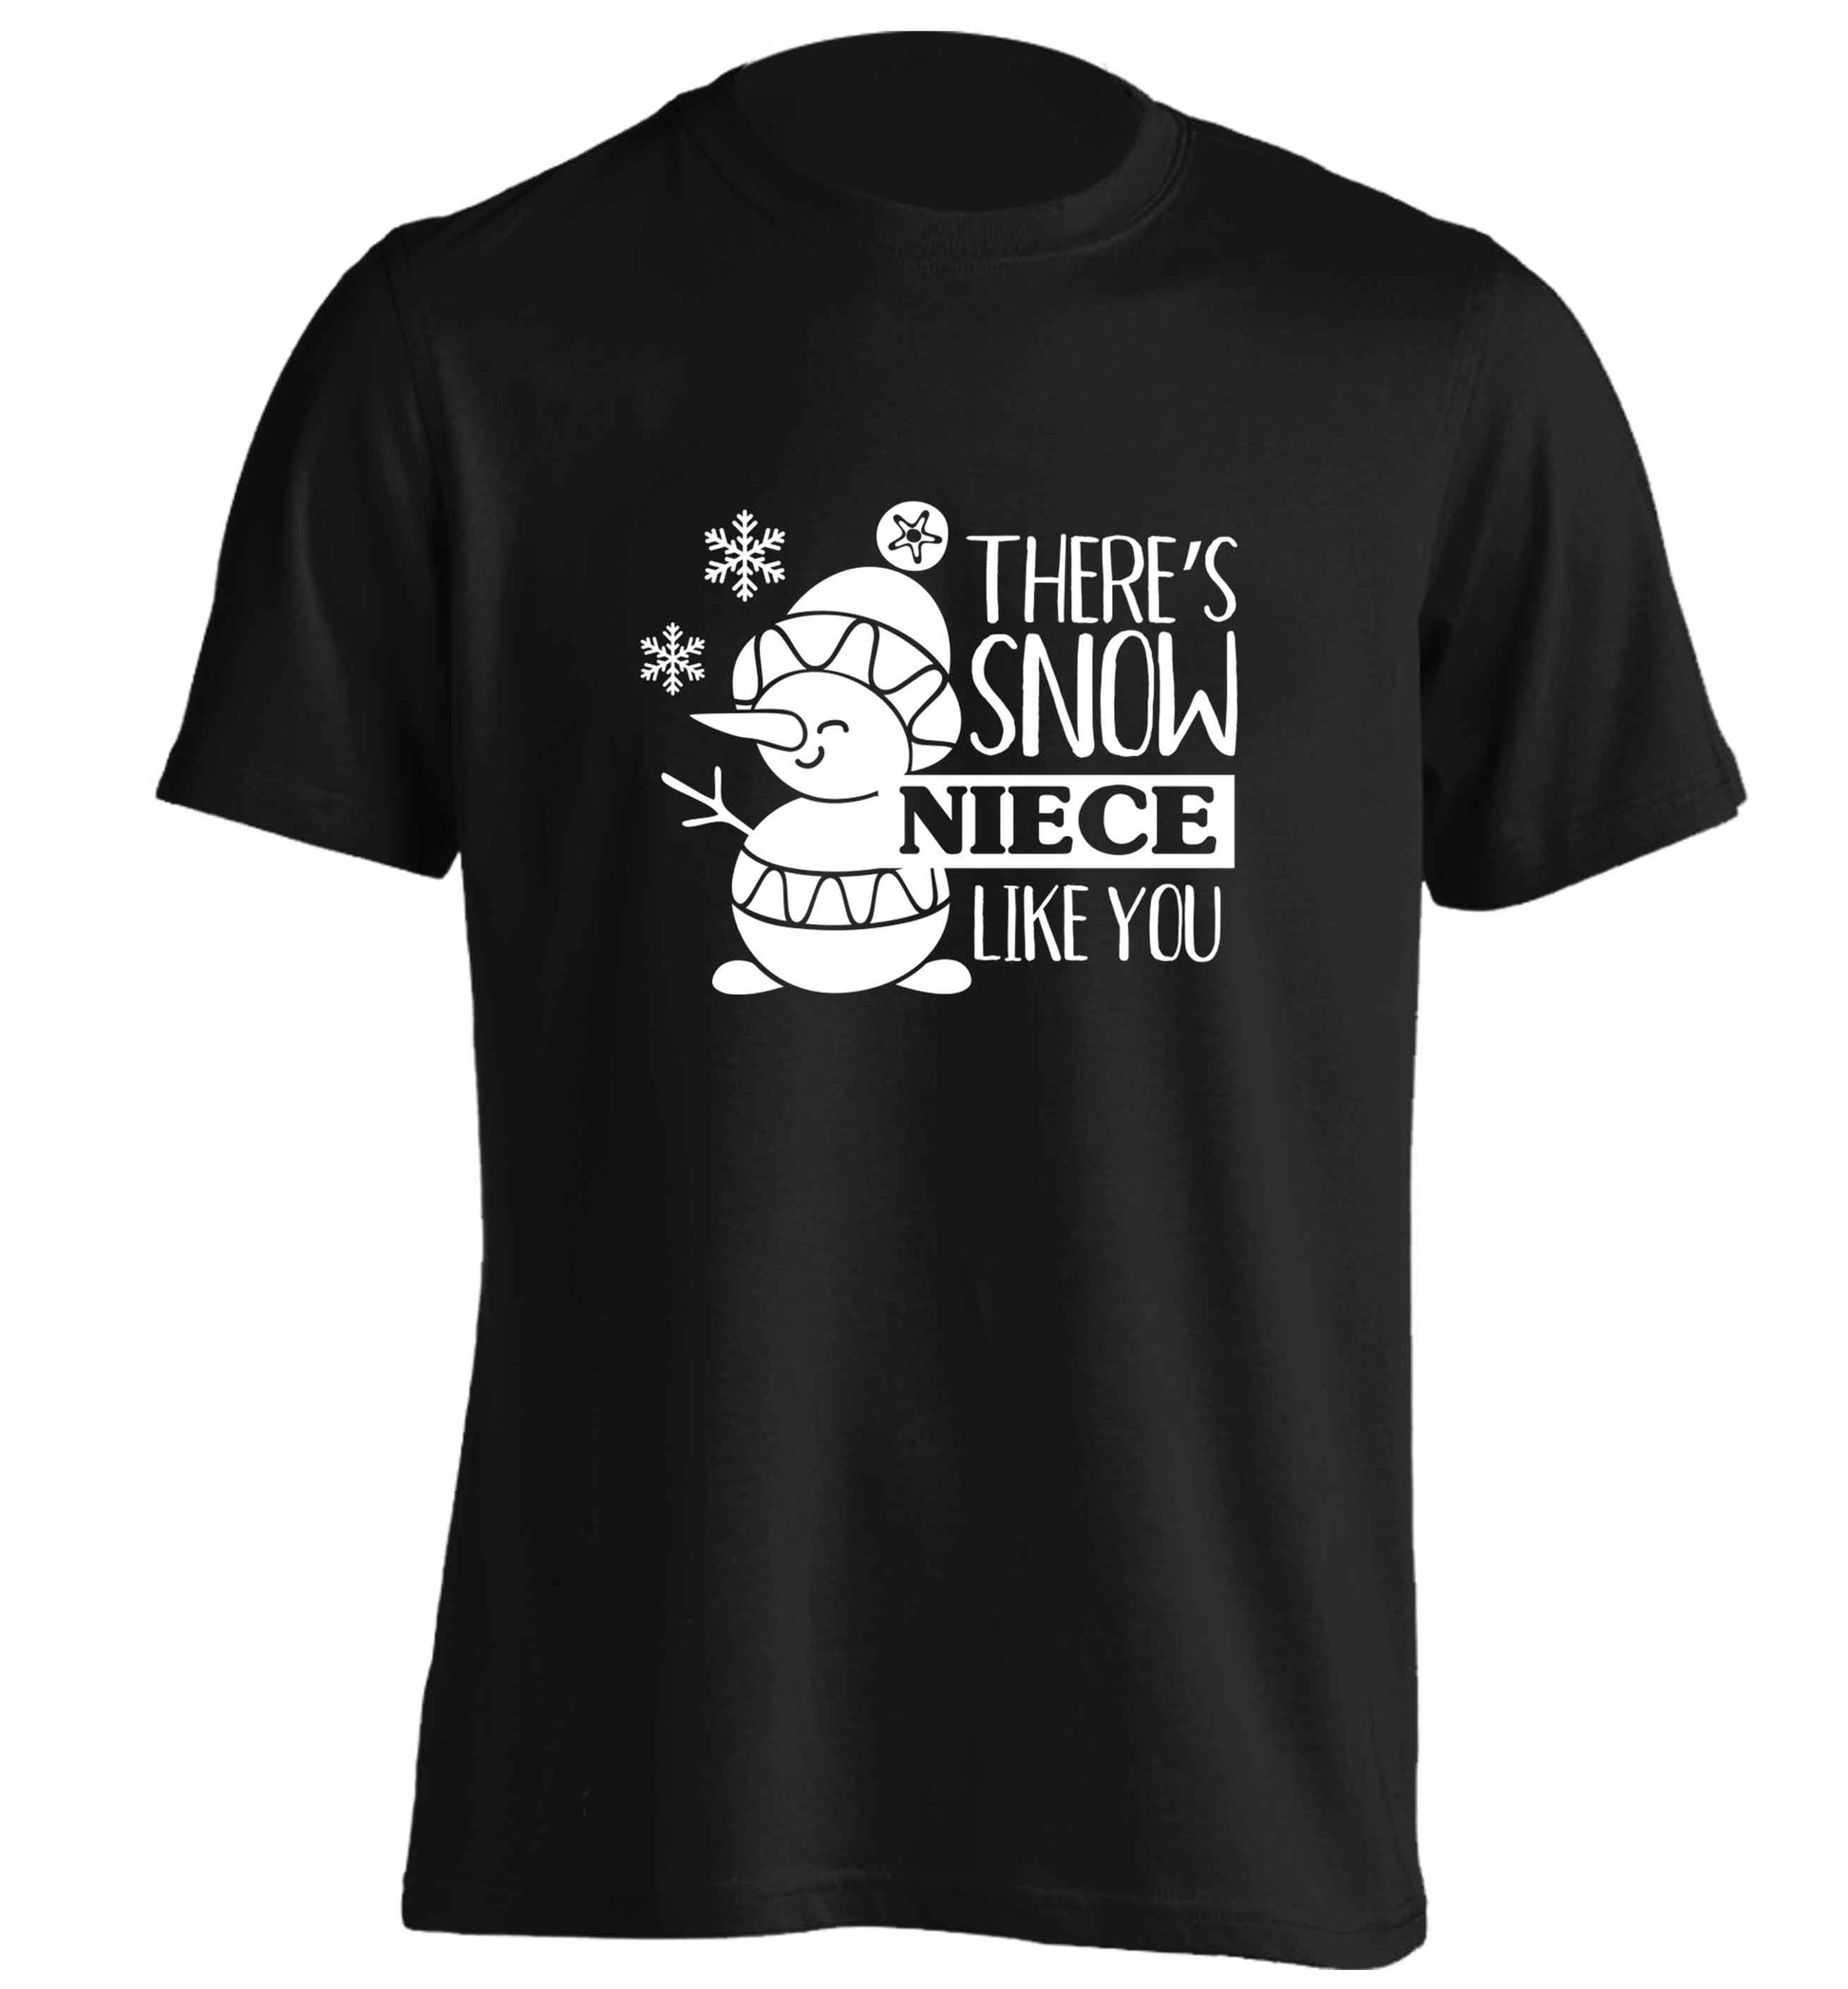 There's snow niece like you adults unisex black Tshirt 2XL